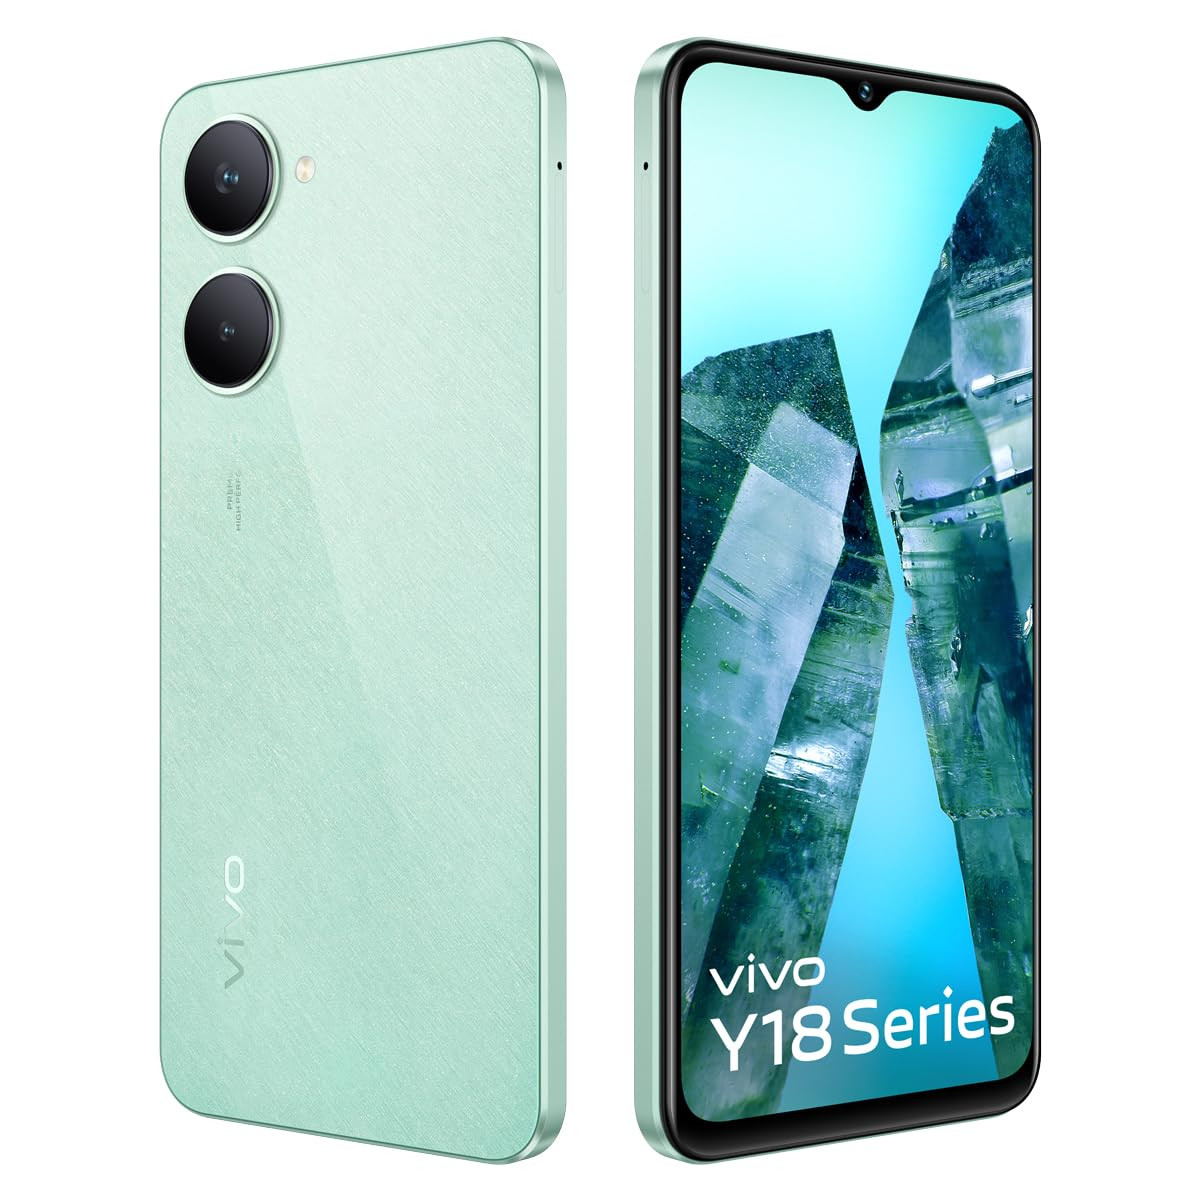 vivo Y18 Gem Green 4GB RAM 128GB Storage with No Cost EMIAdditional Exchange Offers  Without Charger